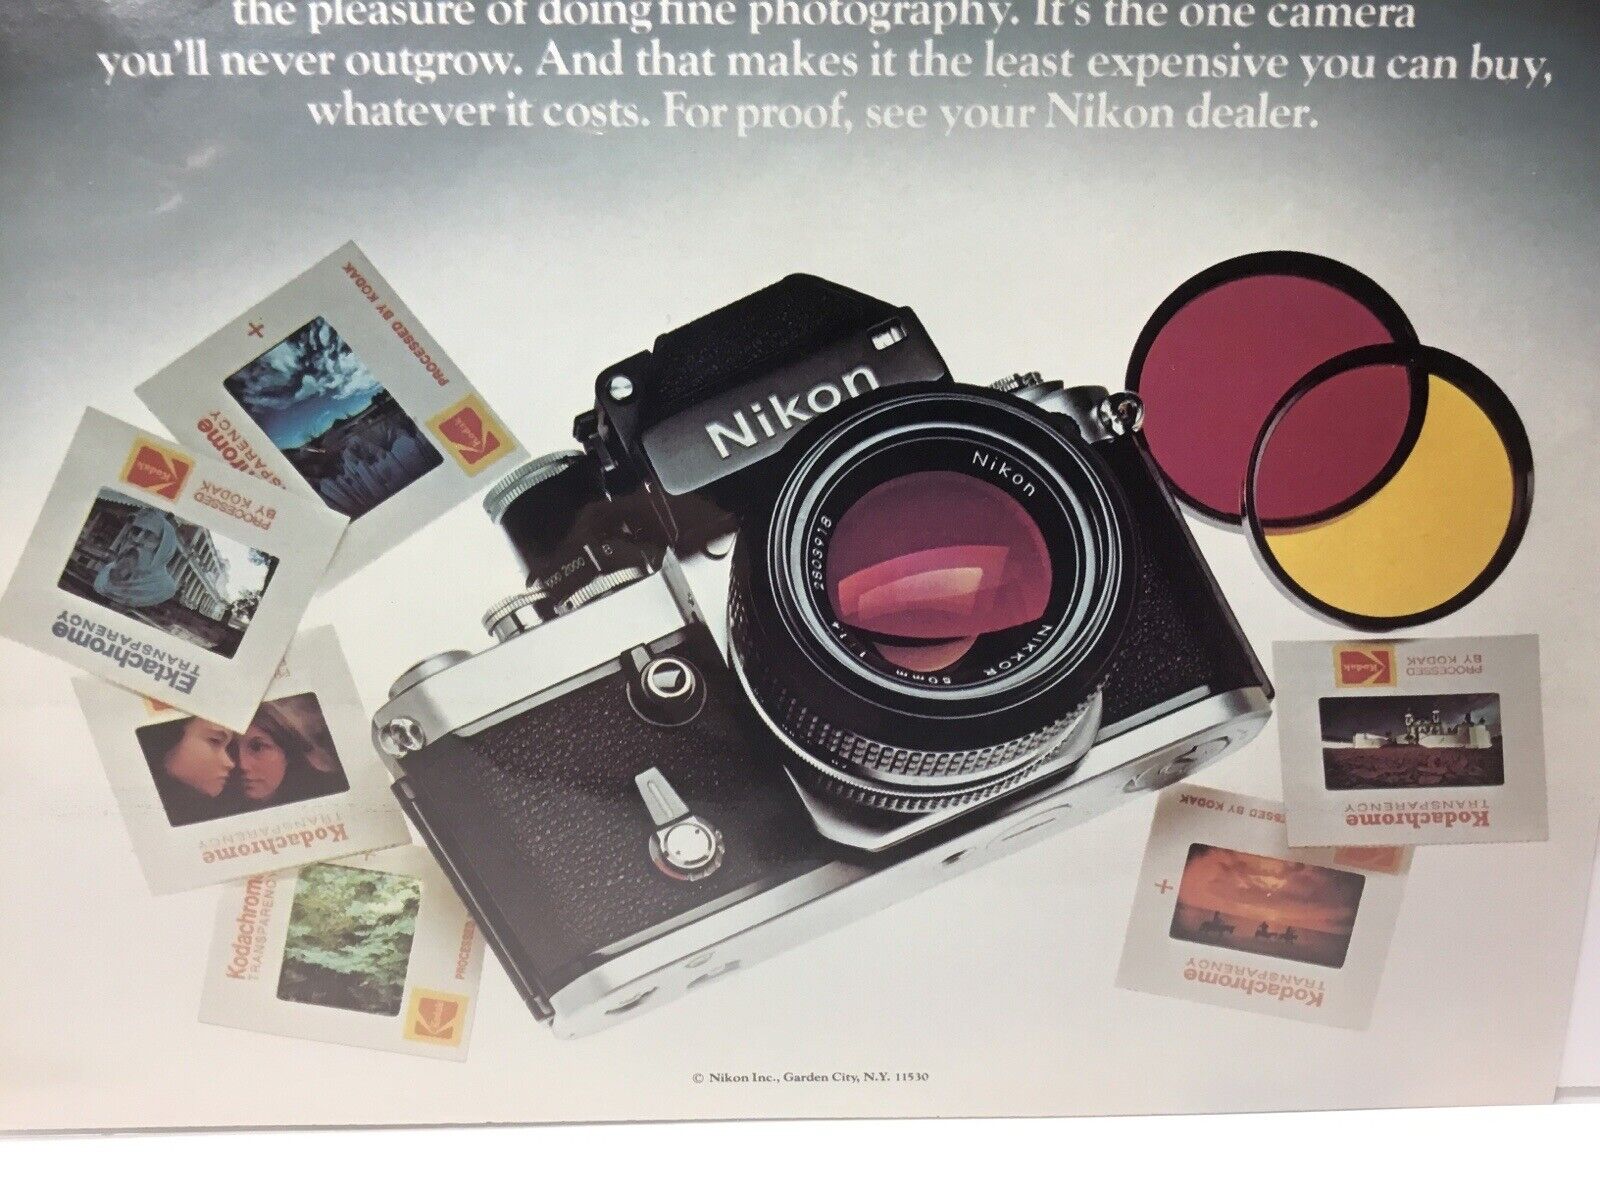 Nikon What Would Life Be Without It. 1977 Original Print Ad.